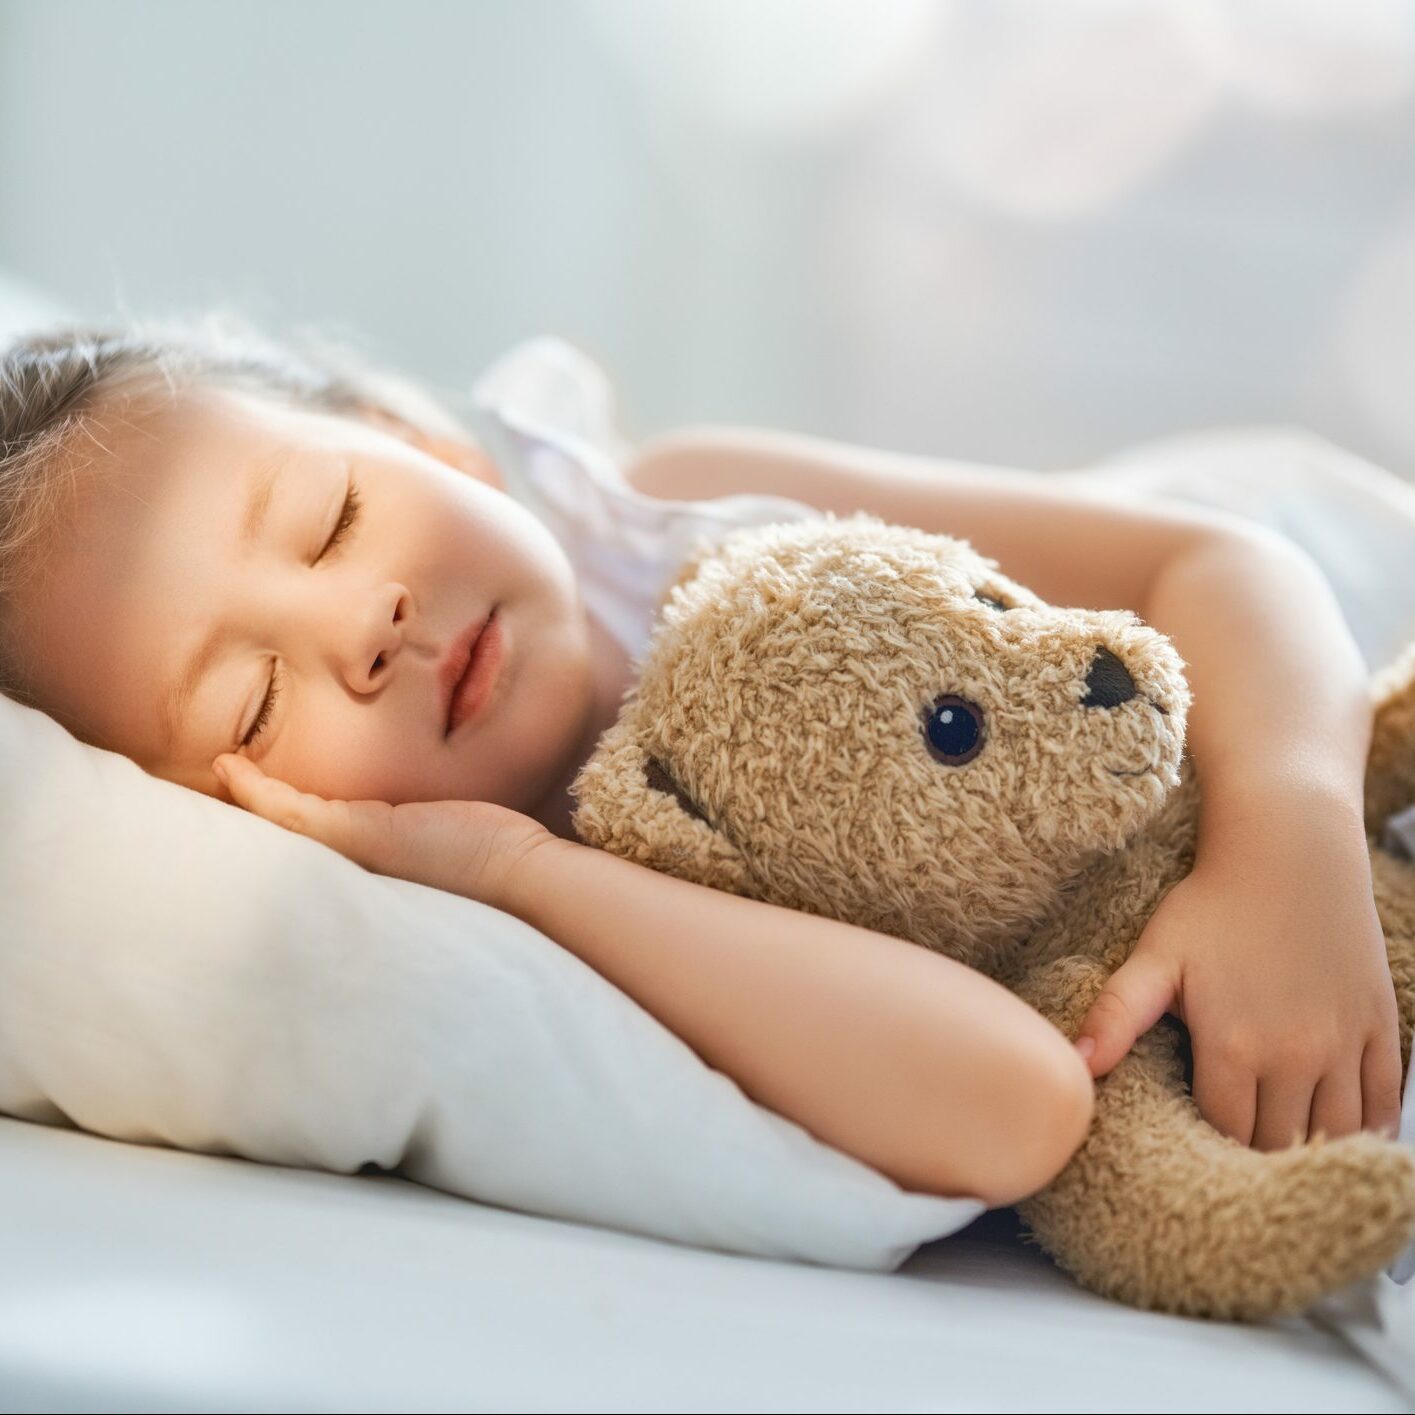 Adorable little child is sleeping in the bed with her toy. The girl is hugging the teddy bear.